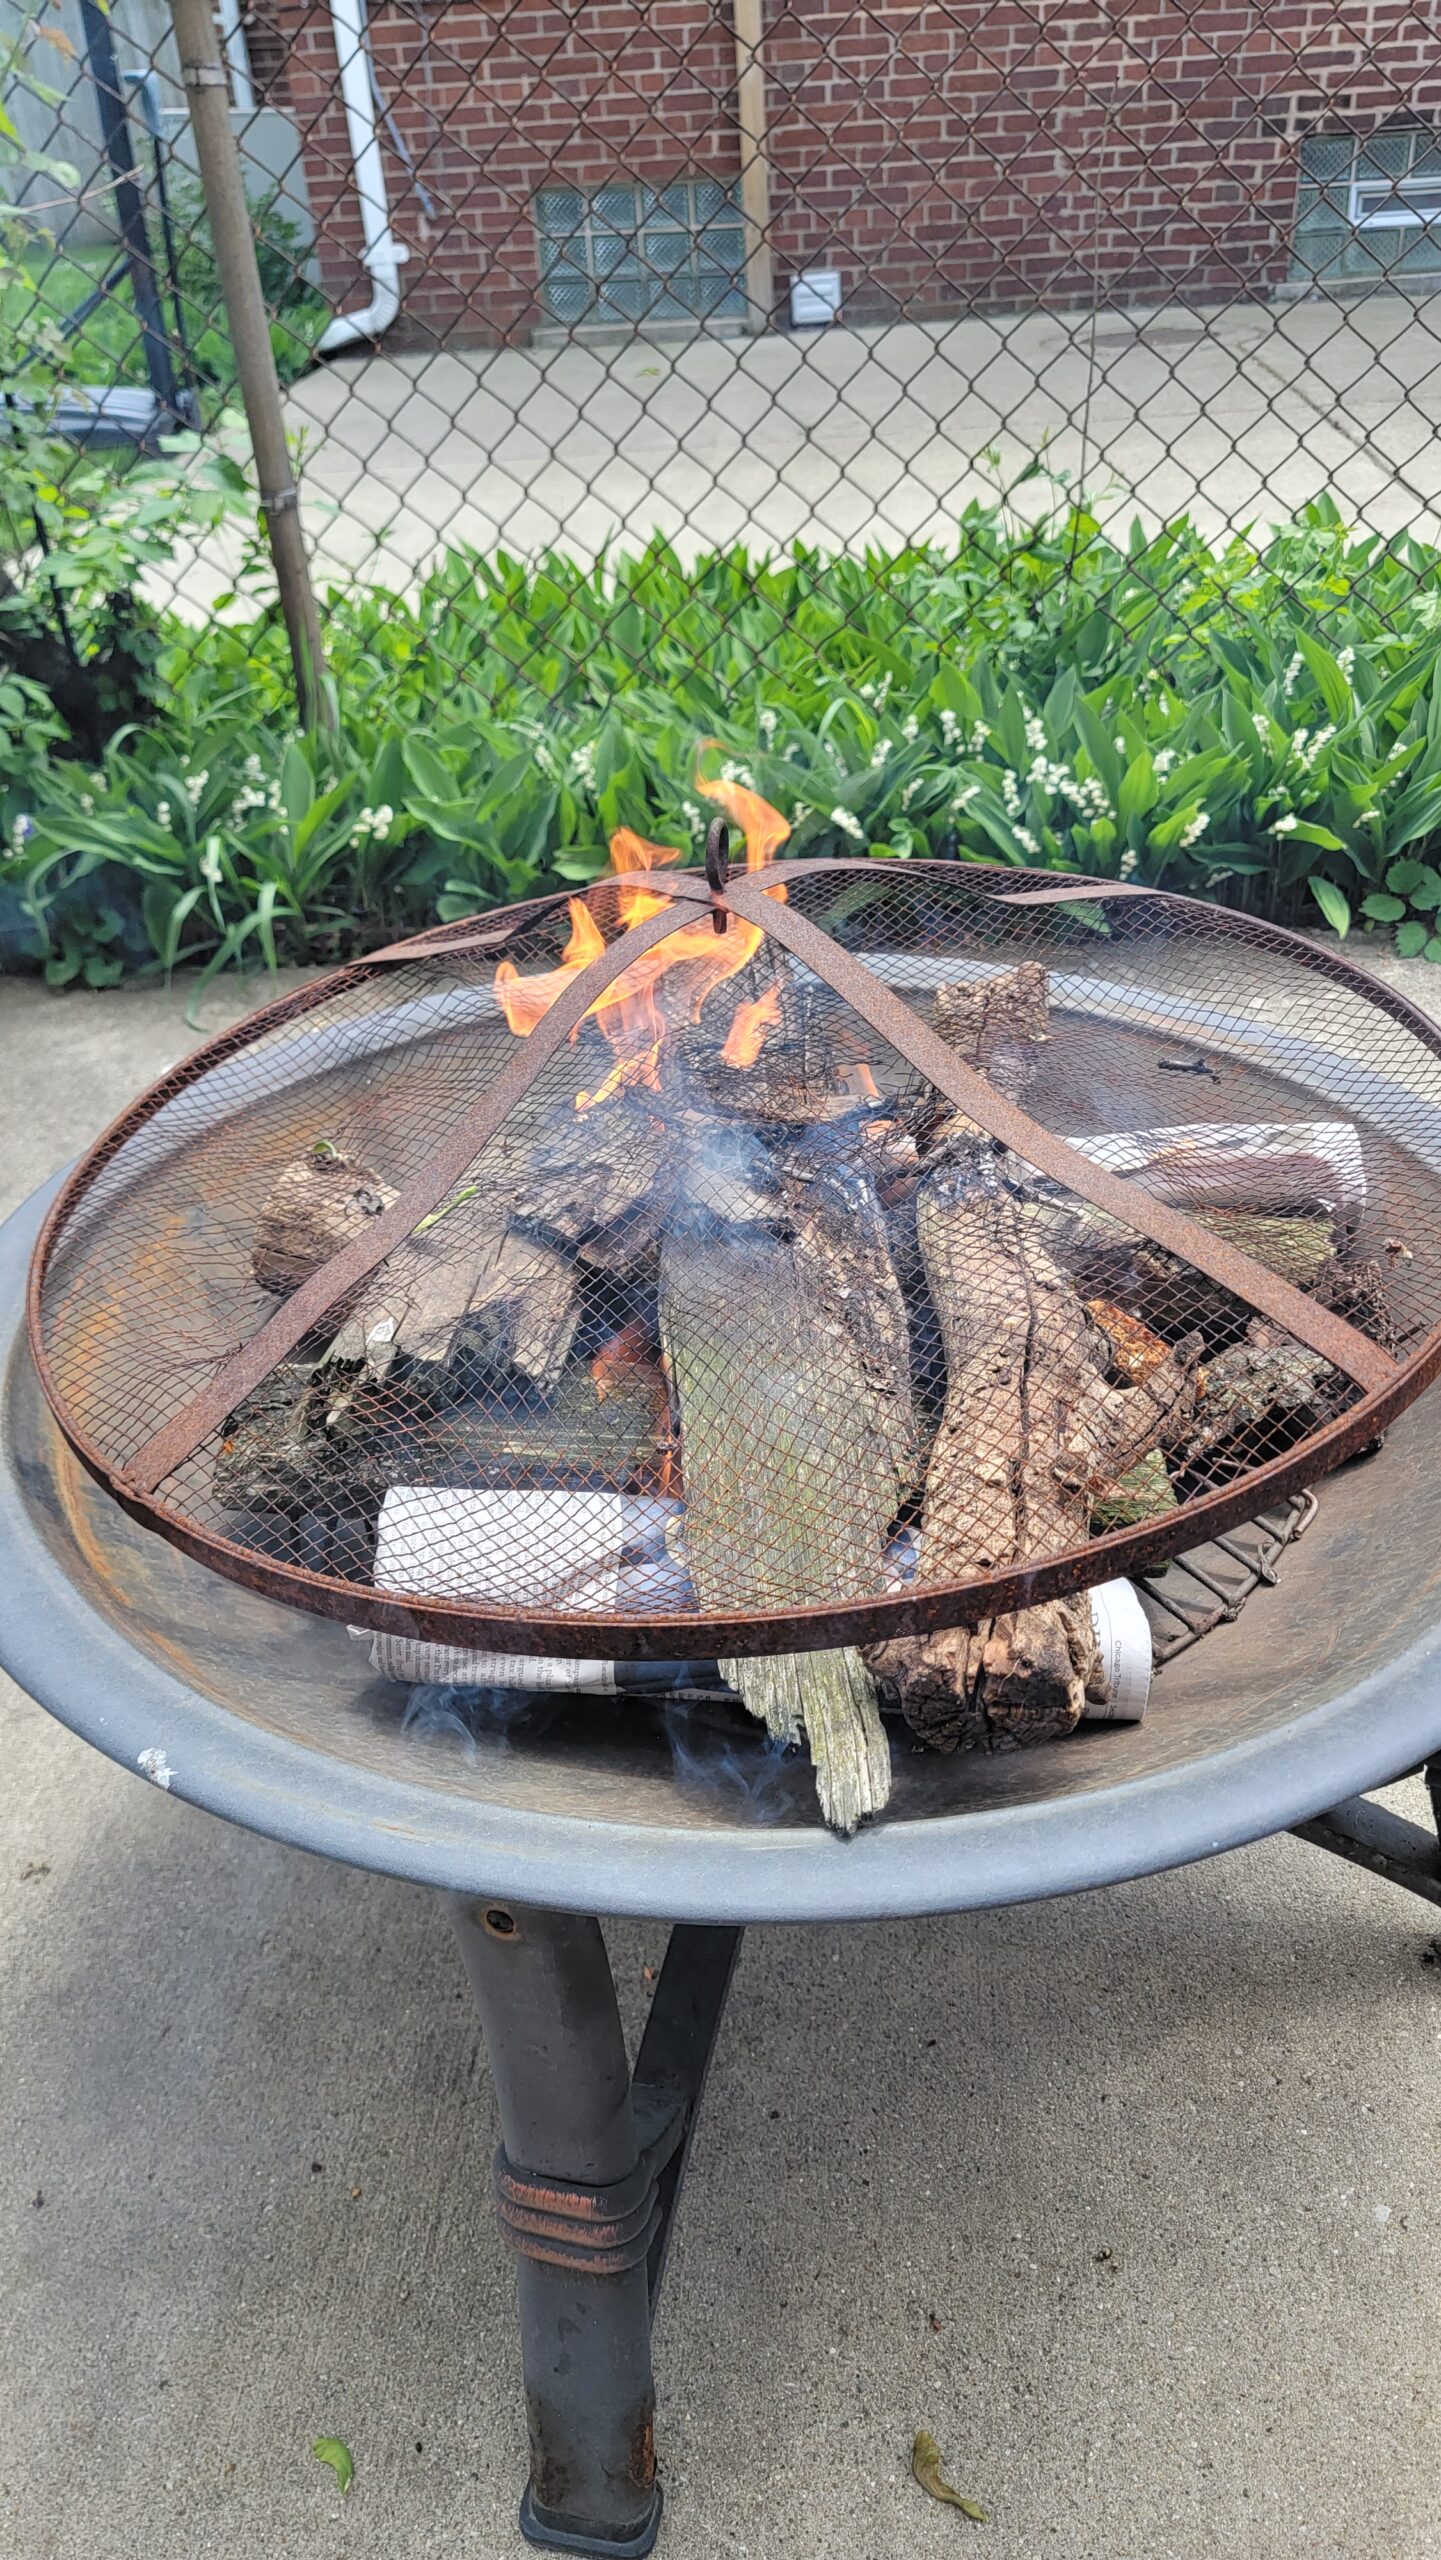 Building the fire pit fire